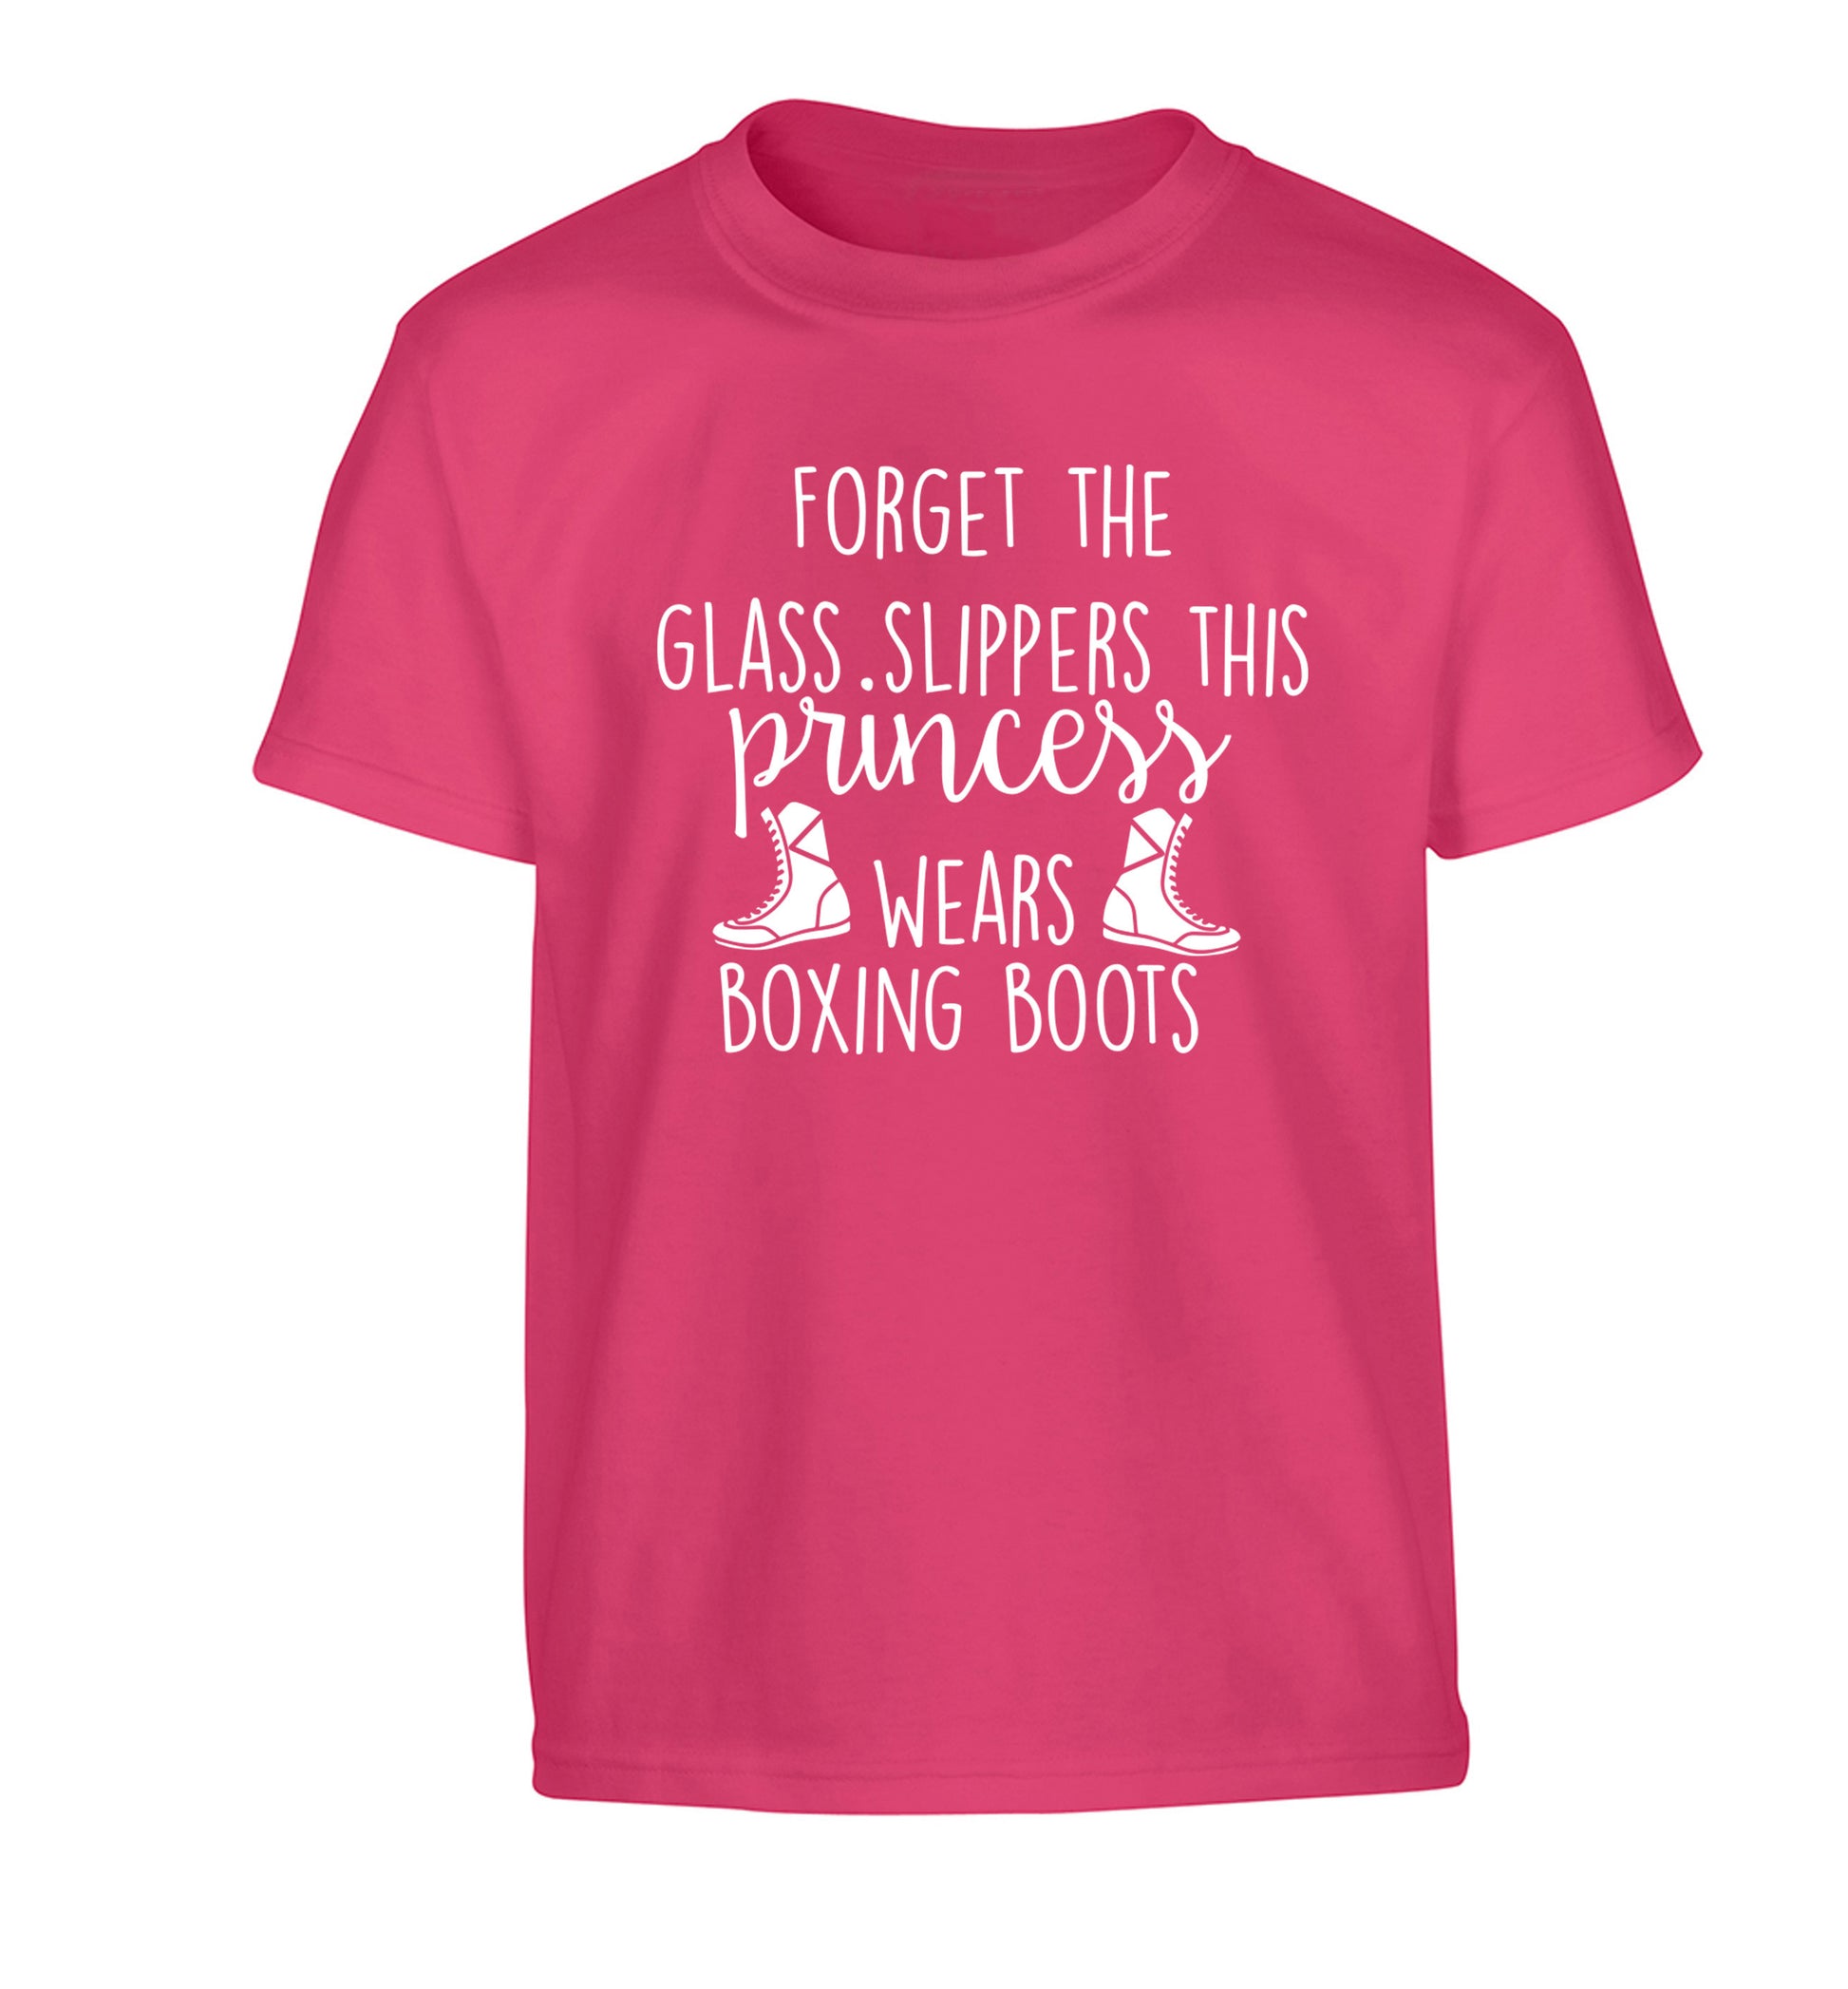 Forget the glass slippers this princess wears boxing boots Children's pink Tshirt 12-14 Years